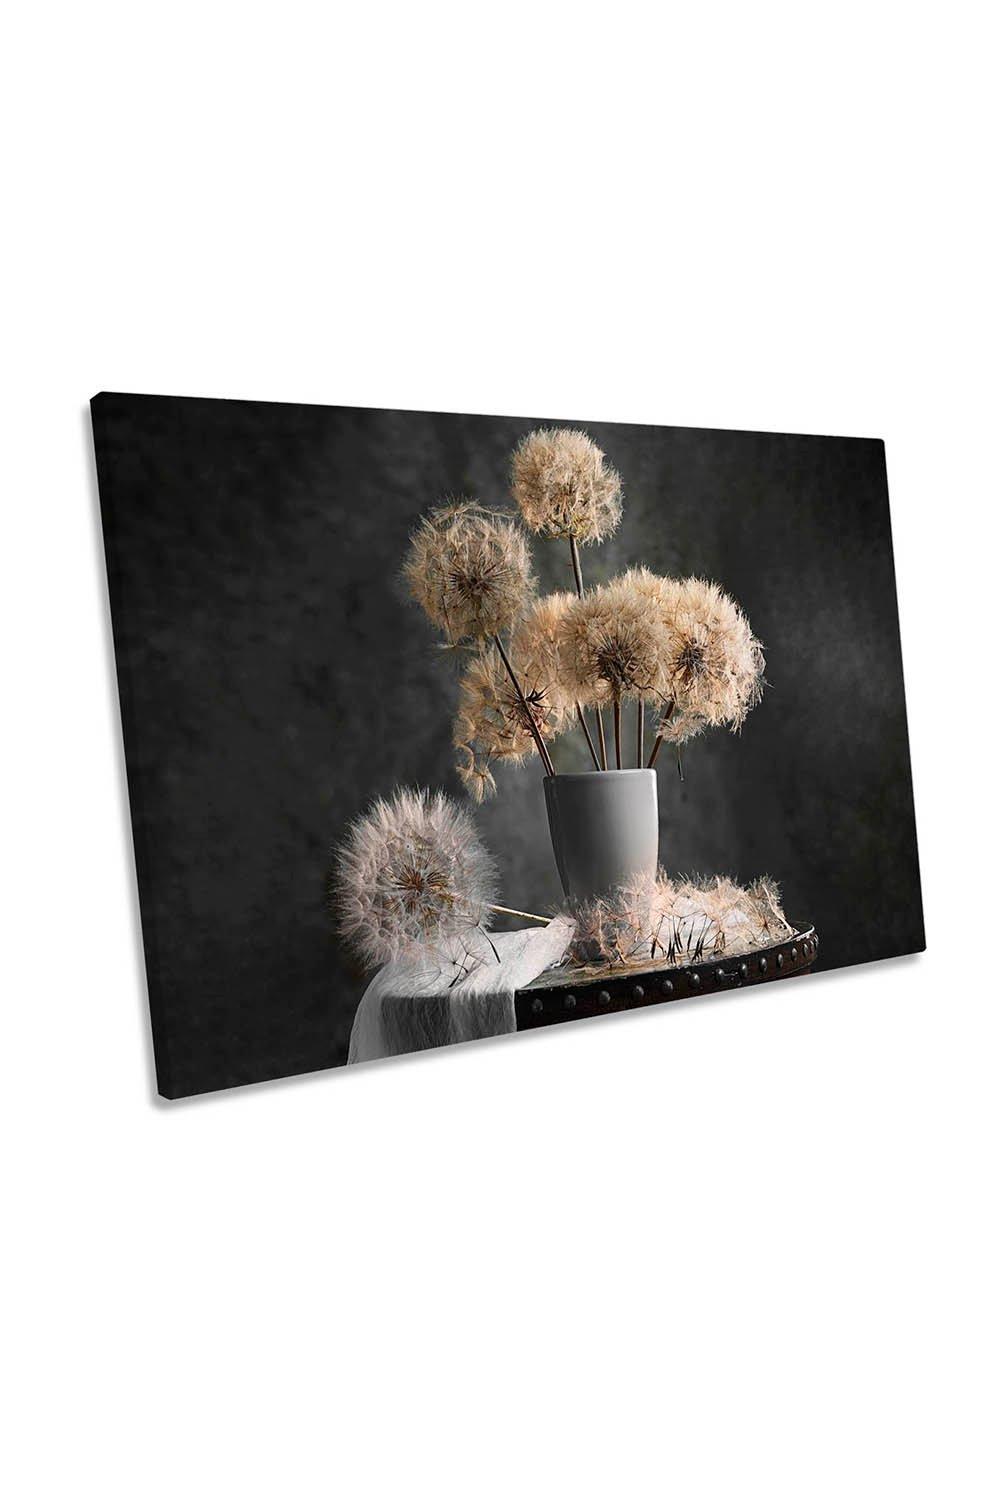 Dandelion Seed Pod Still Life Floral Canvas Wall Art Picture Print